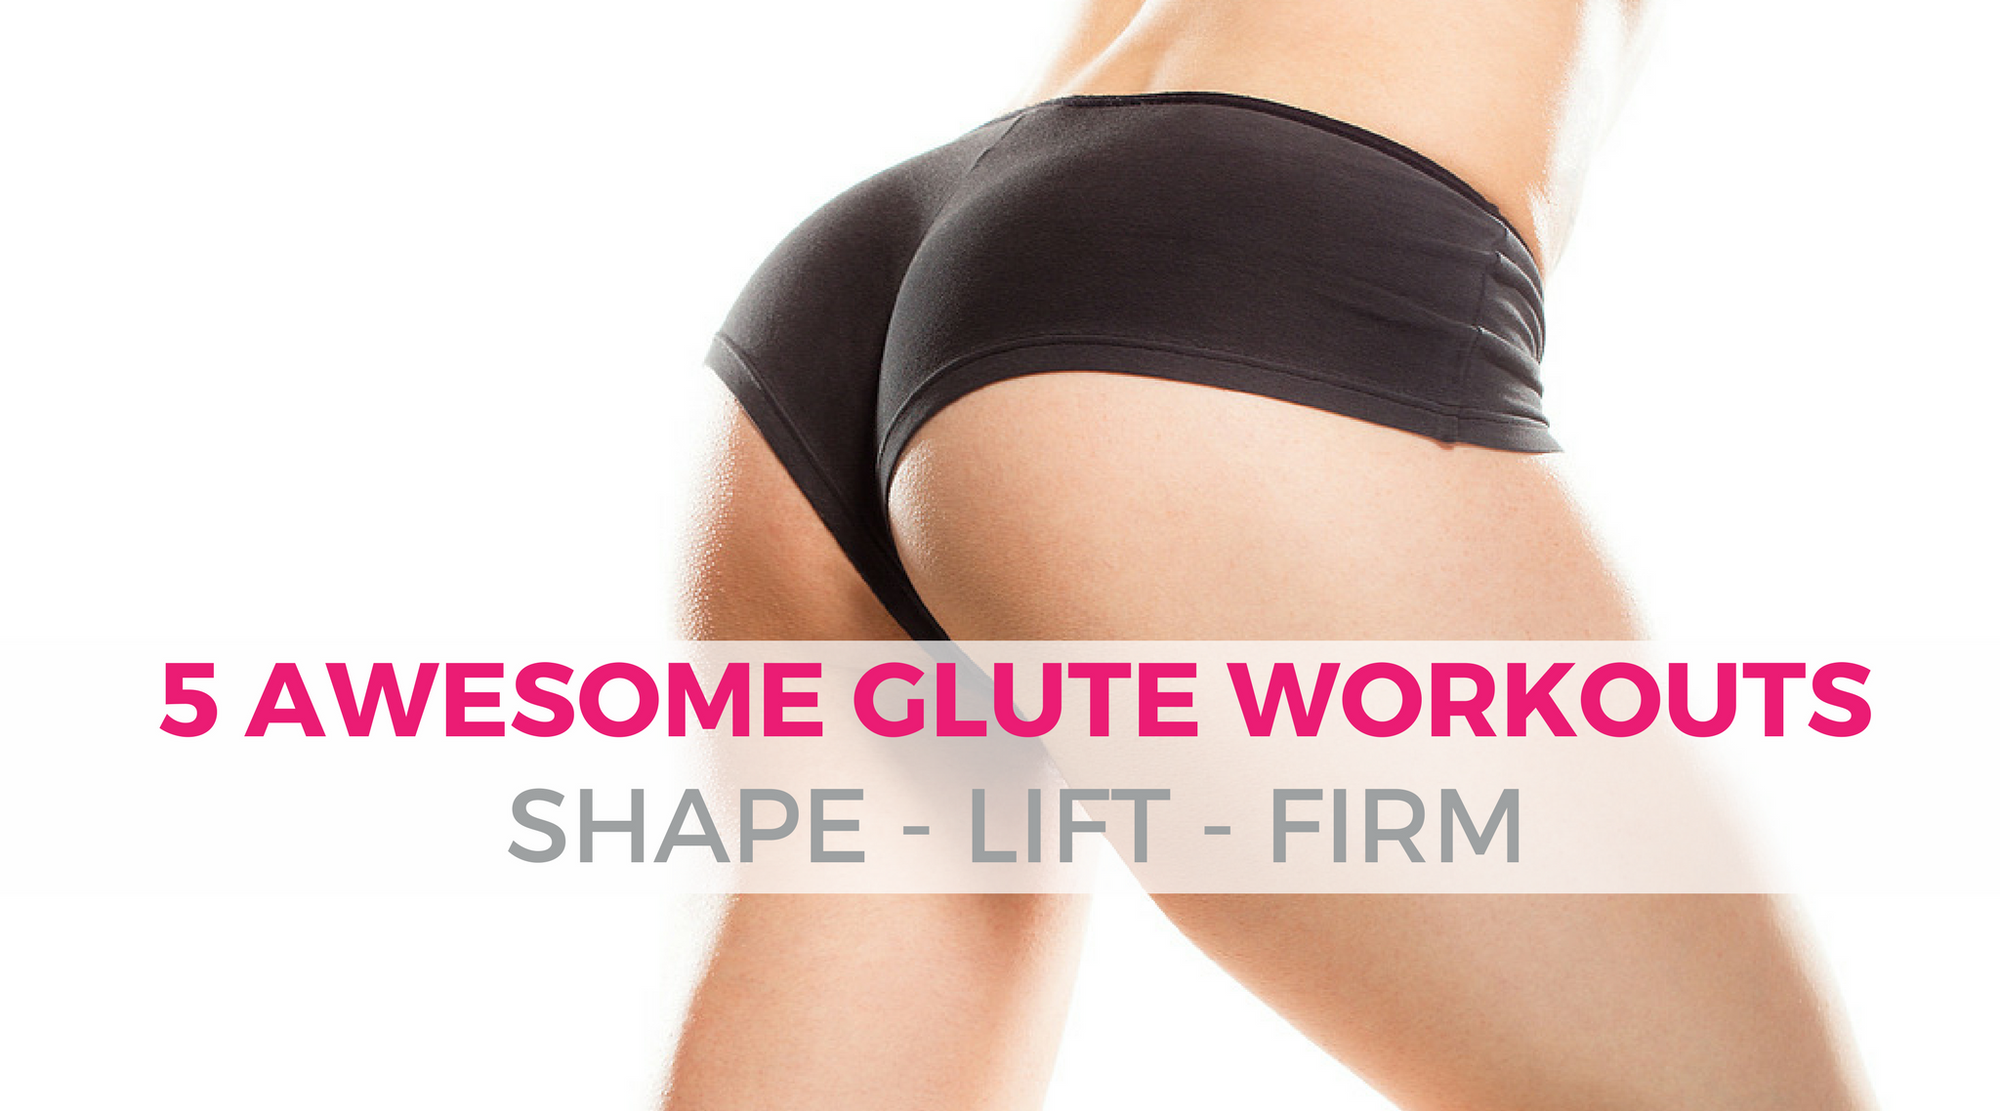 How to Get Your Best Booty: 5 Awesome At Home Exercises for Women